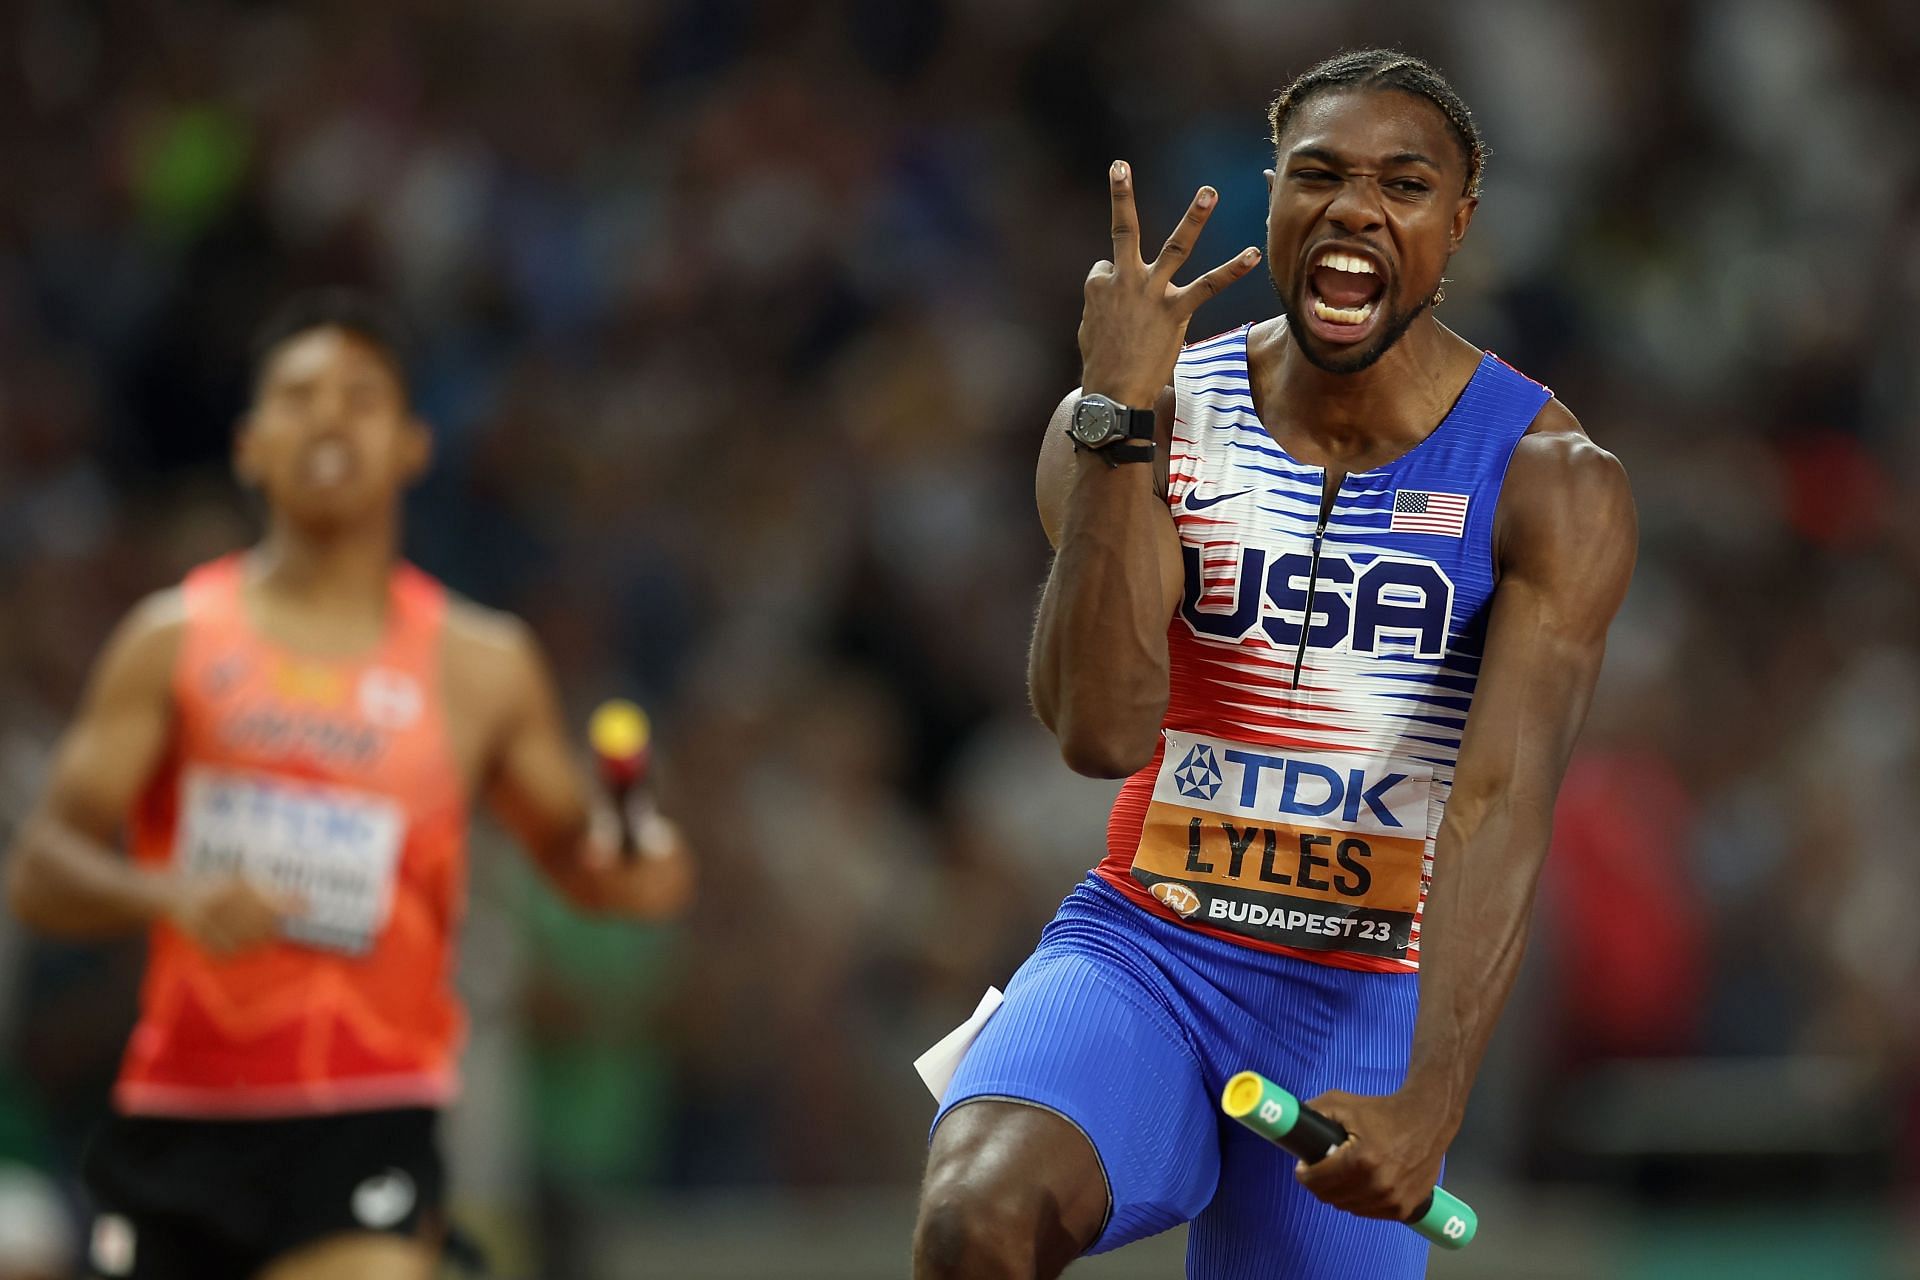 Noah Lyles celebrates after winning the men&#039;s 4x100m relay final at the 2023 World Athletics Championships in Budapest